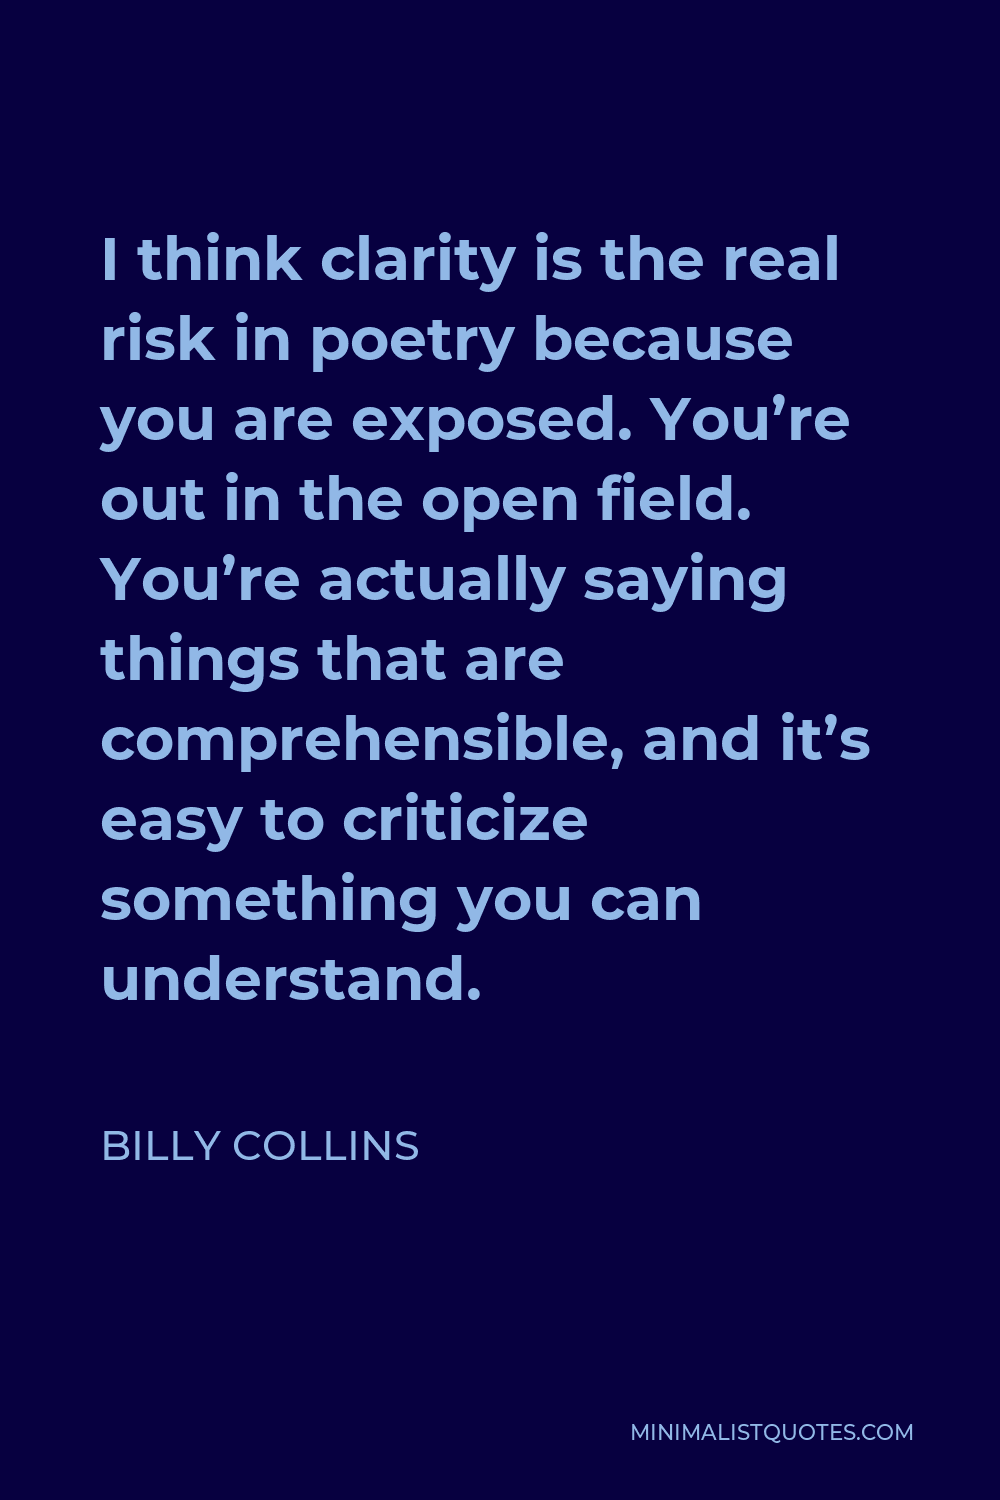 Billy Collins Quote - I think clarity is the real risk in poetry because you are exposed. You’re out in the open field. You’re actually saying things that are comprehensible, and it’s easy to criticize something you can understand.